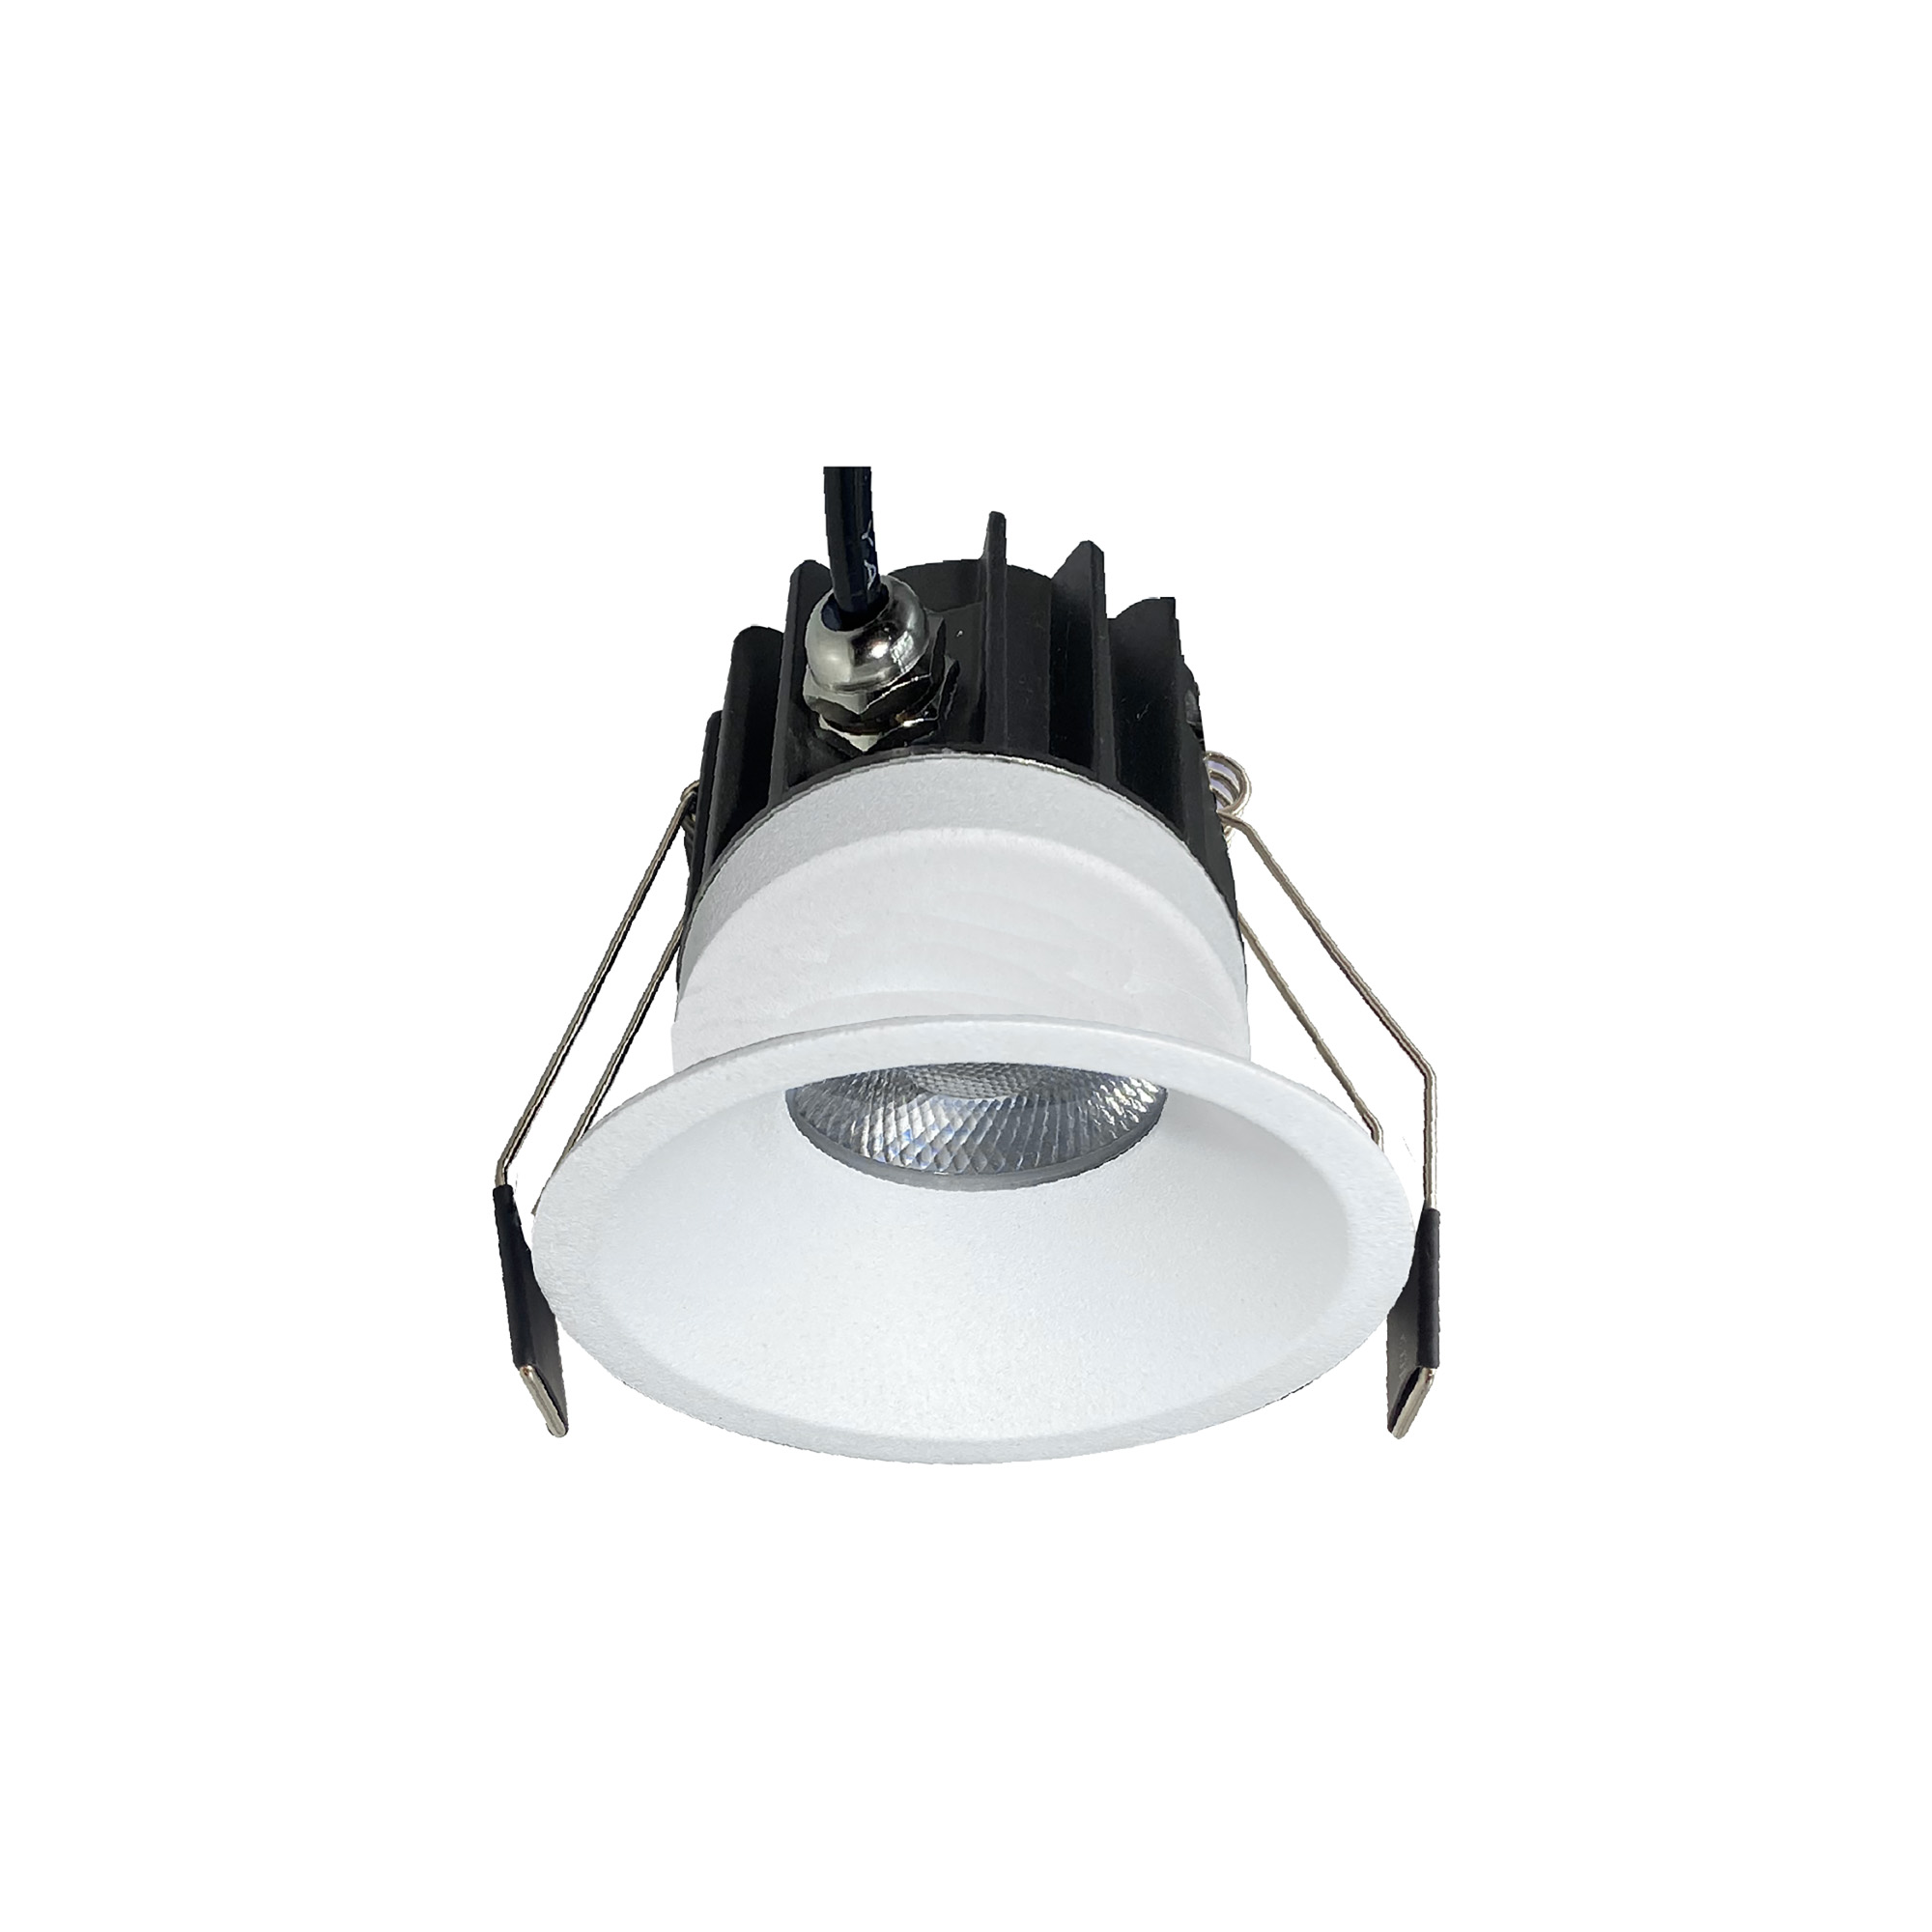 M8766  Rombok Downlight 12W LED, Dimmable CCT LED, Cut Out: 75mm, 1080lm, 36° Deg, IP65 DRIVER INC., White